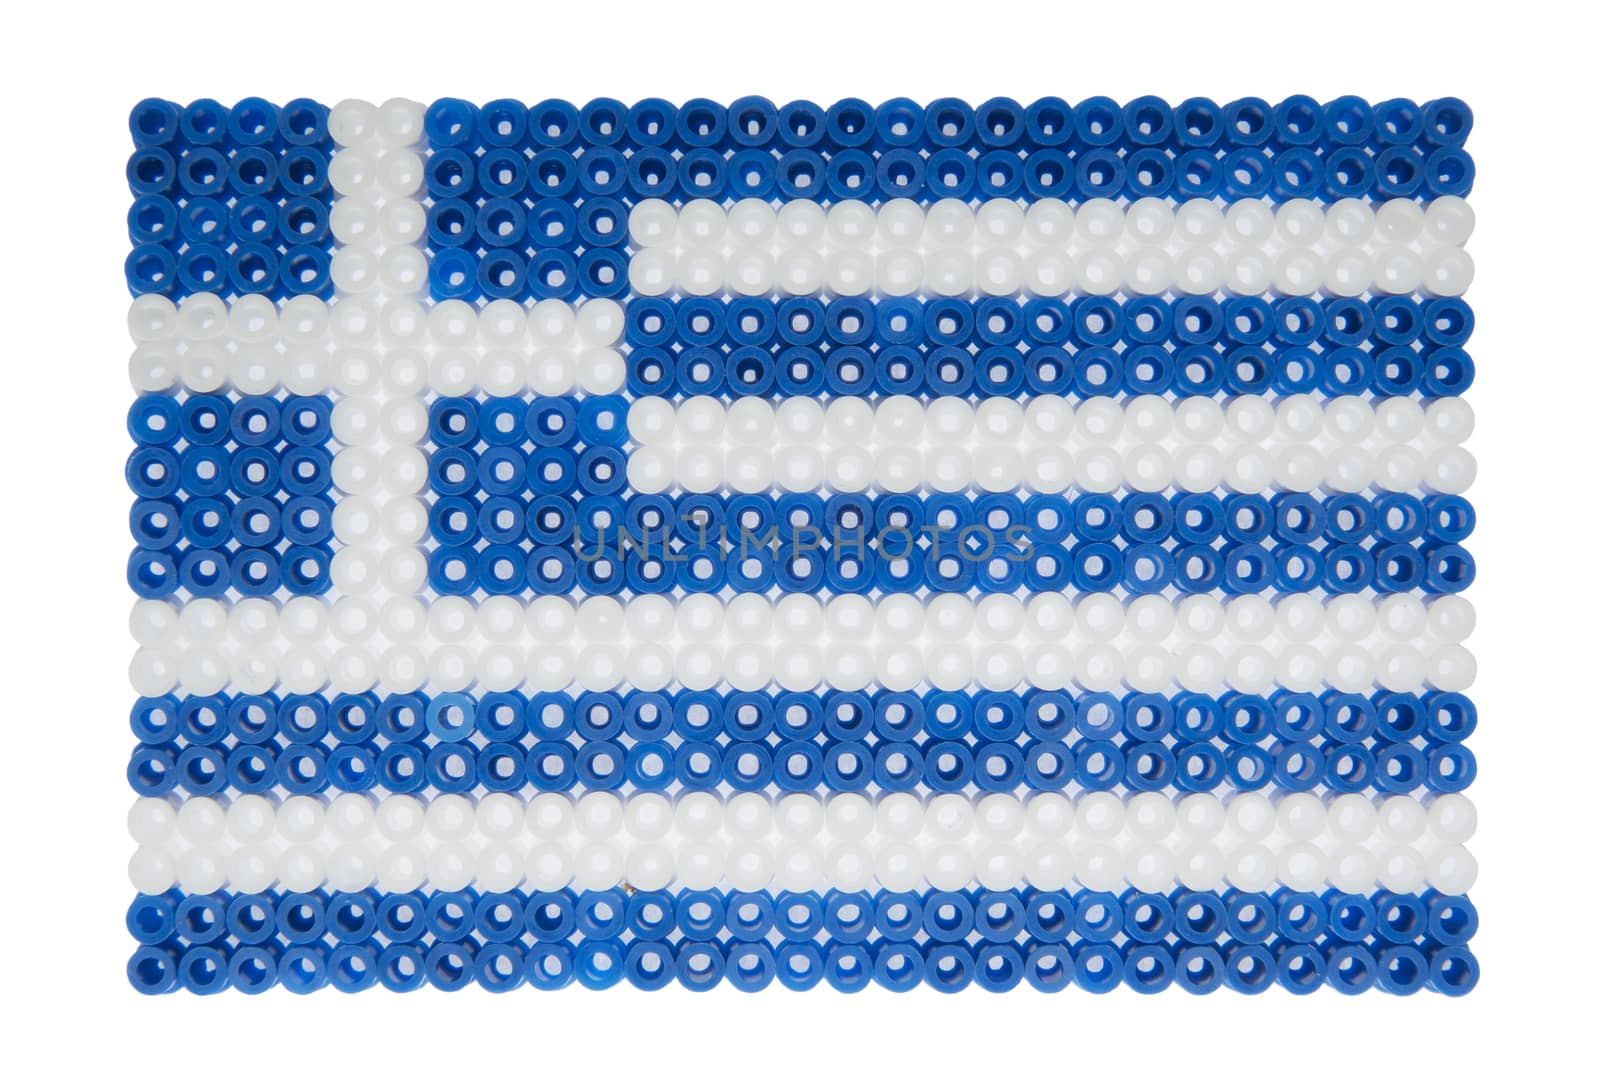 Flag of Greece made of plastic pearls